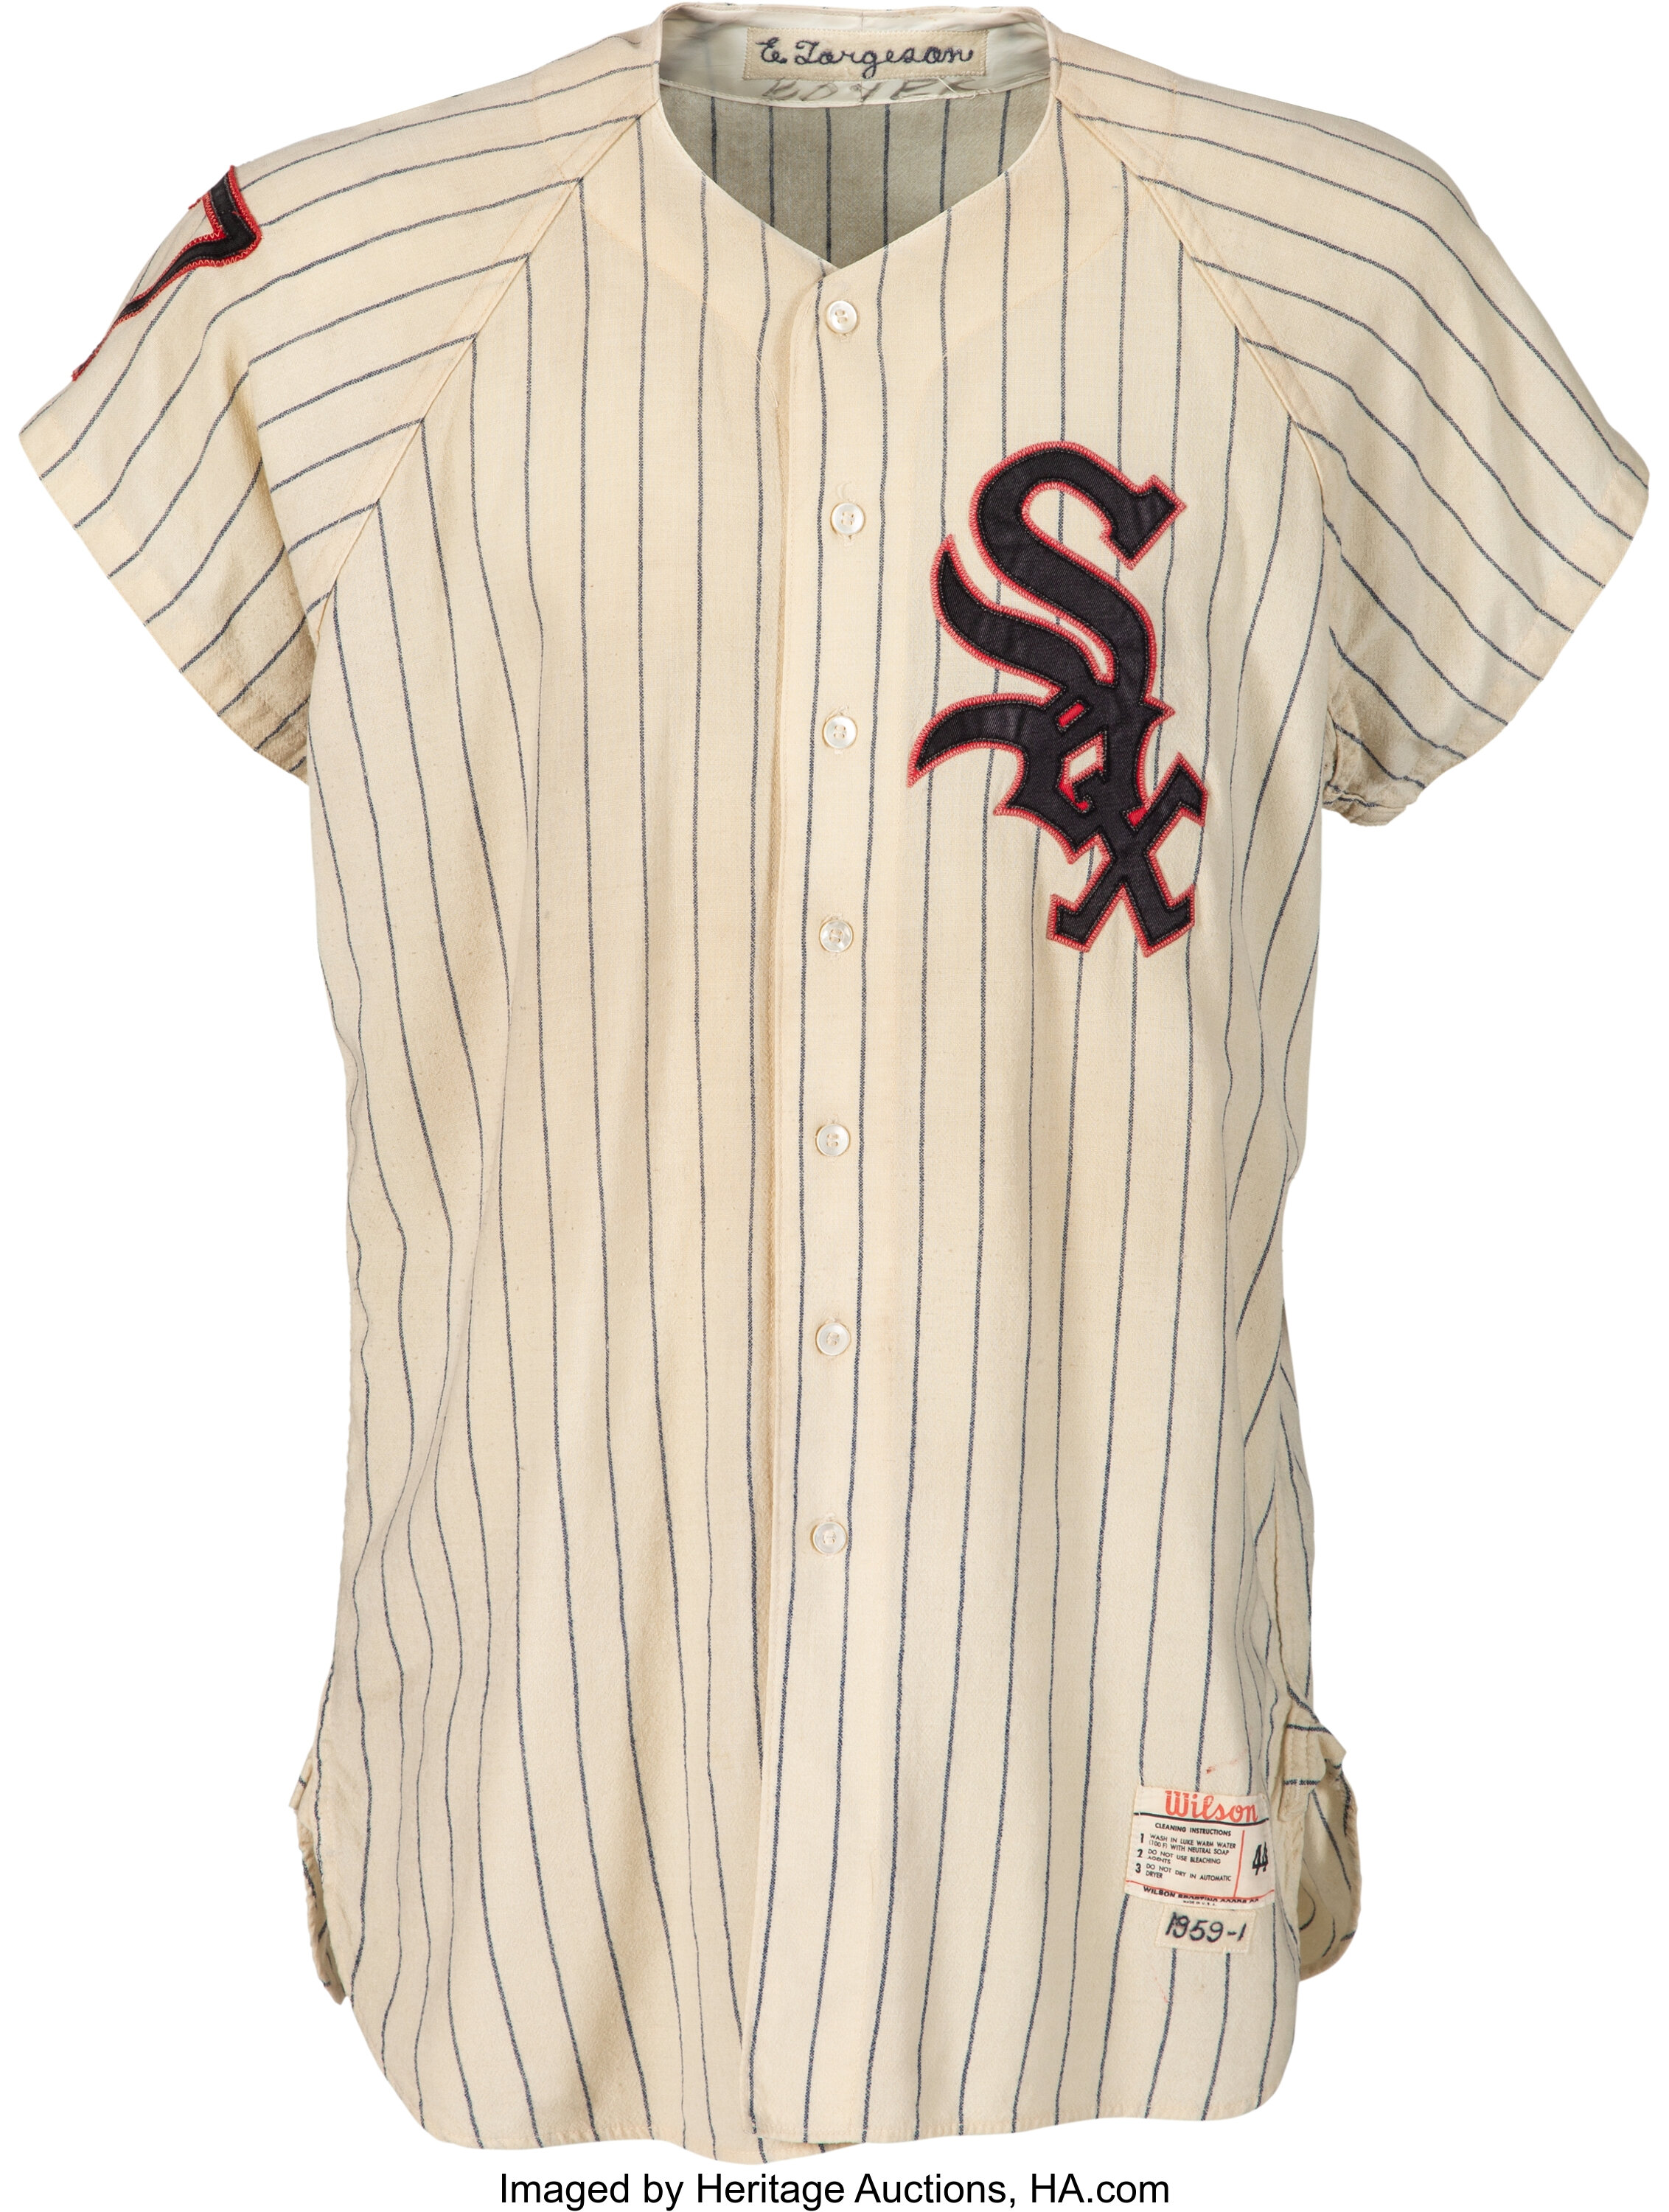 1959 Game Worn Chicago White Sox Jersey (Earl Torgeson) & Pants